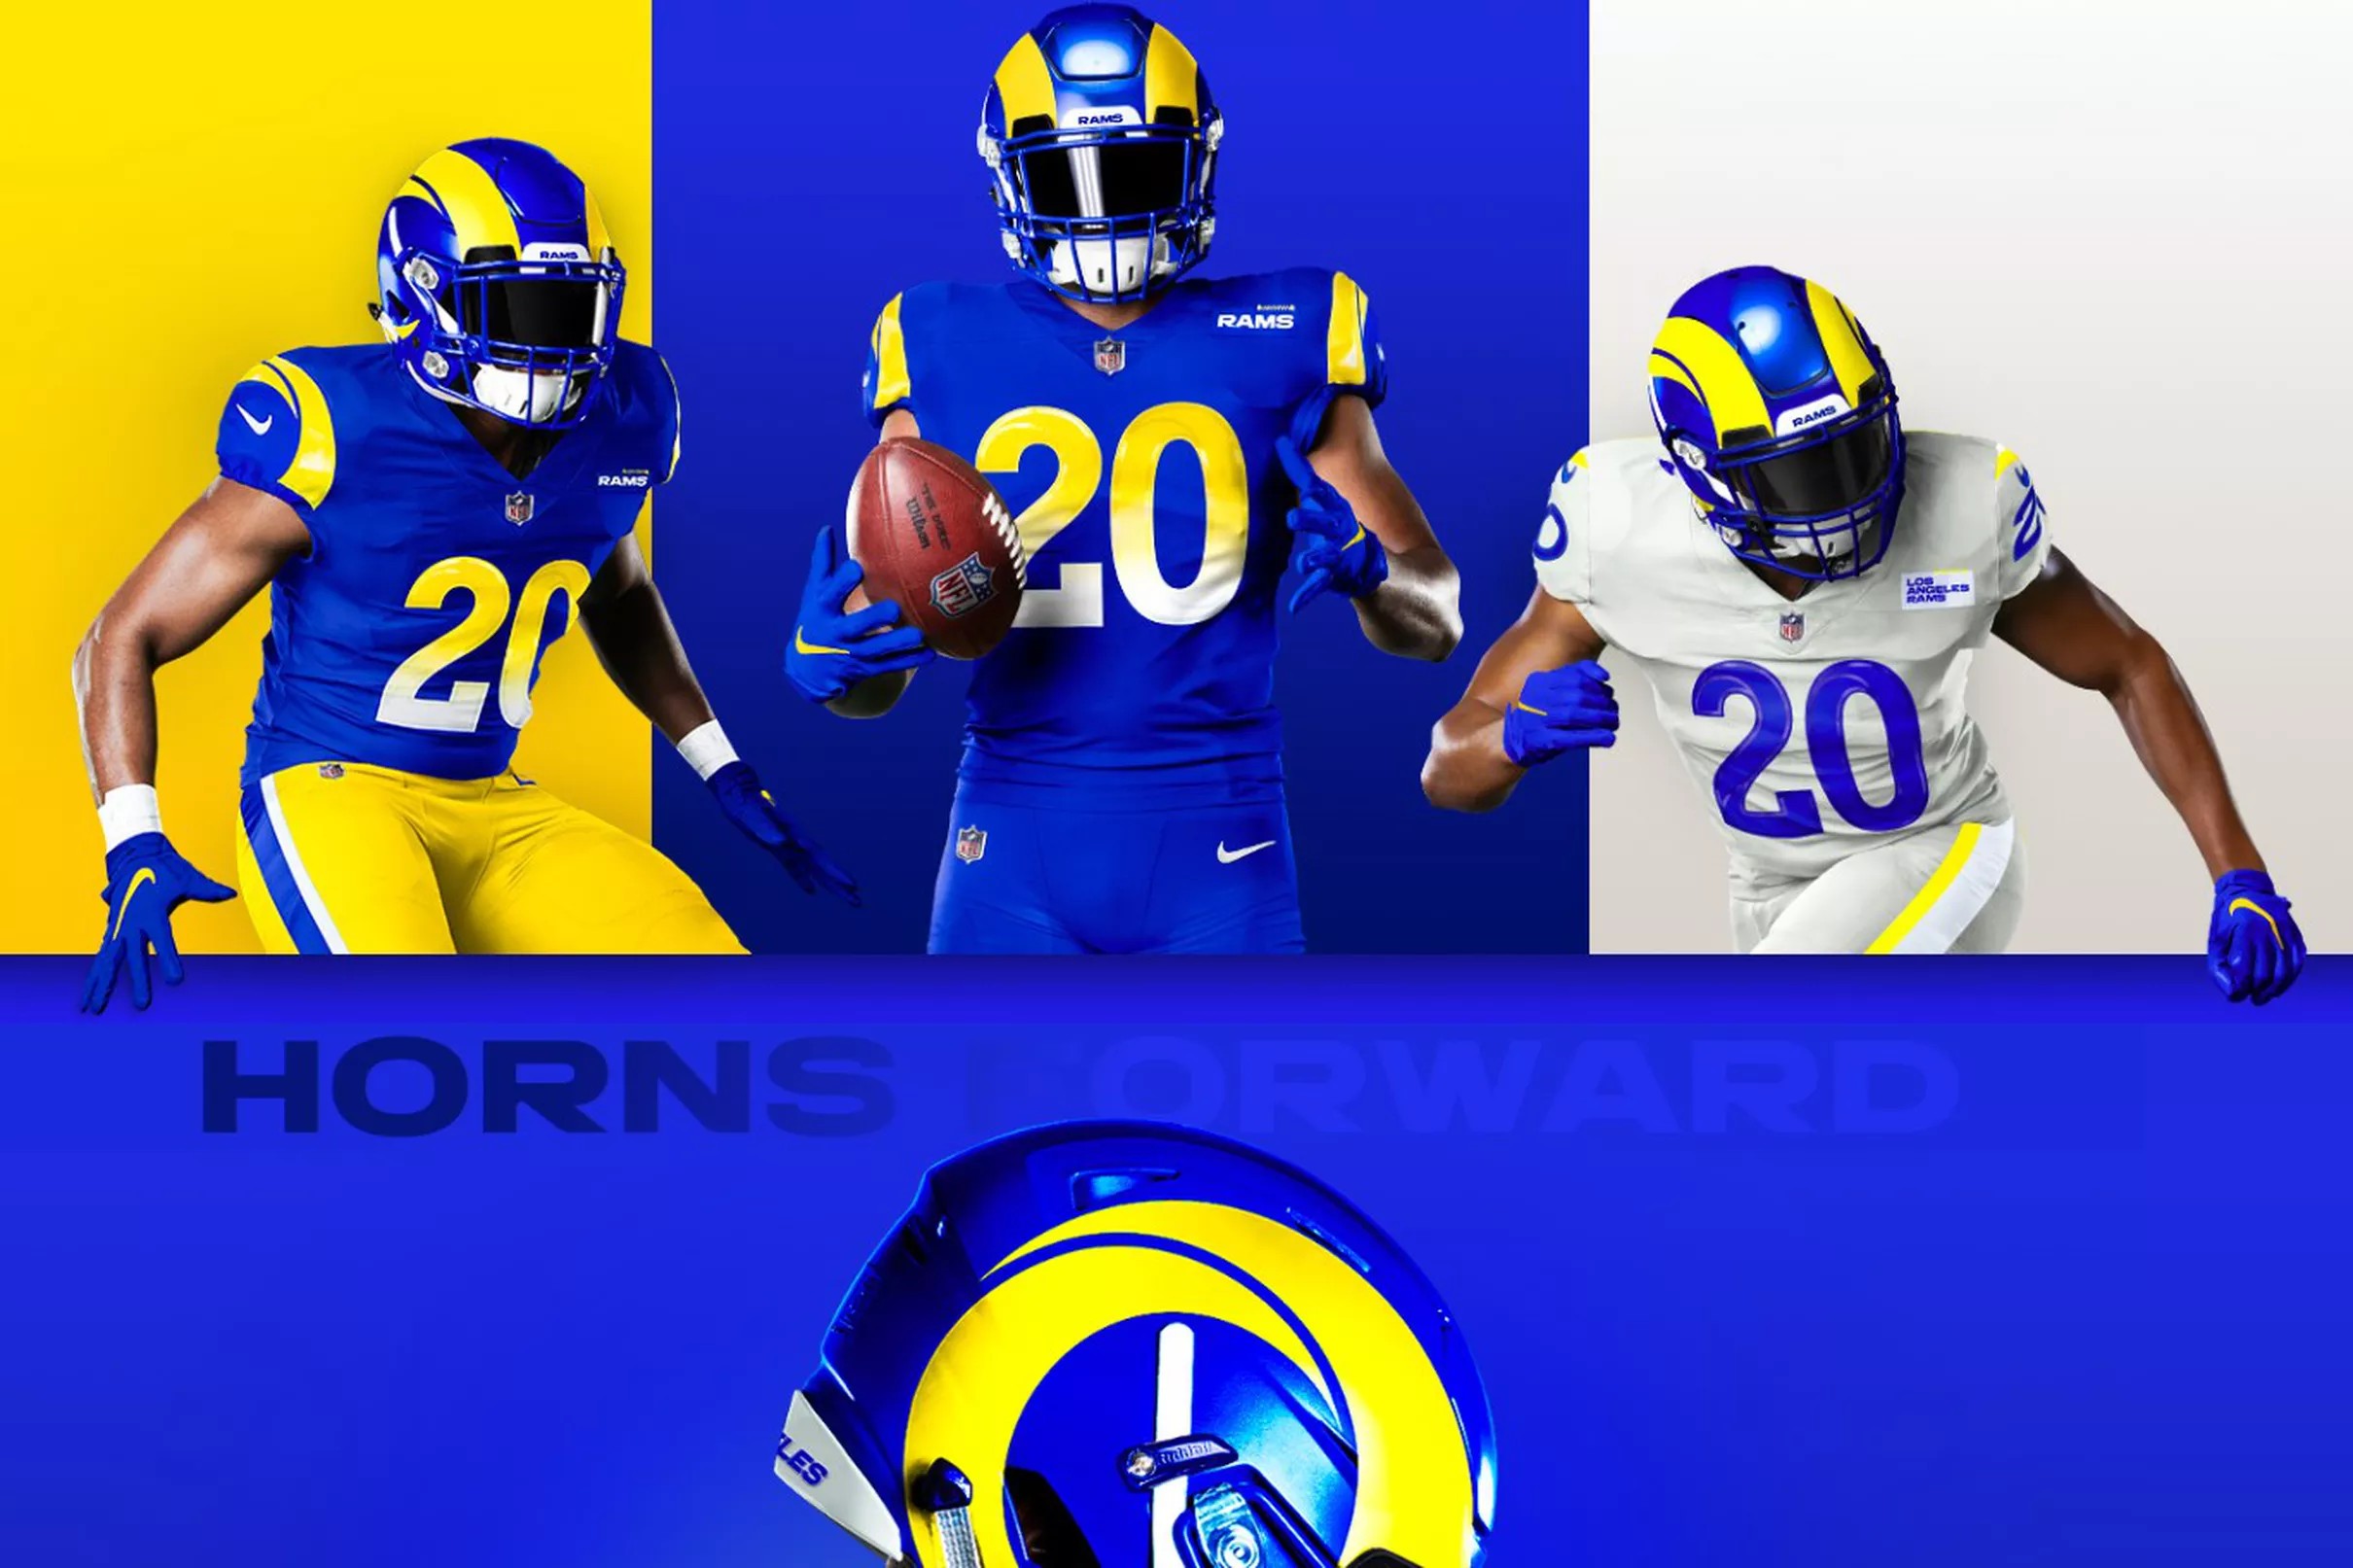 Why did the Rams logo and uniform re-designs get received so poorly by fans?